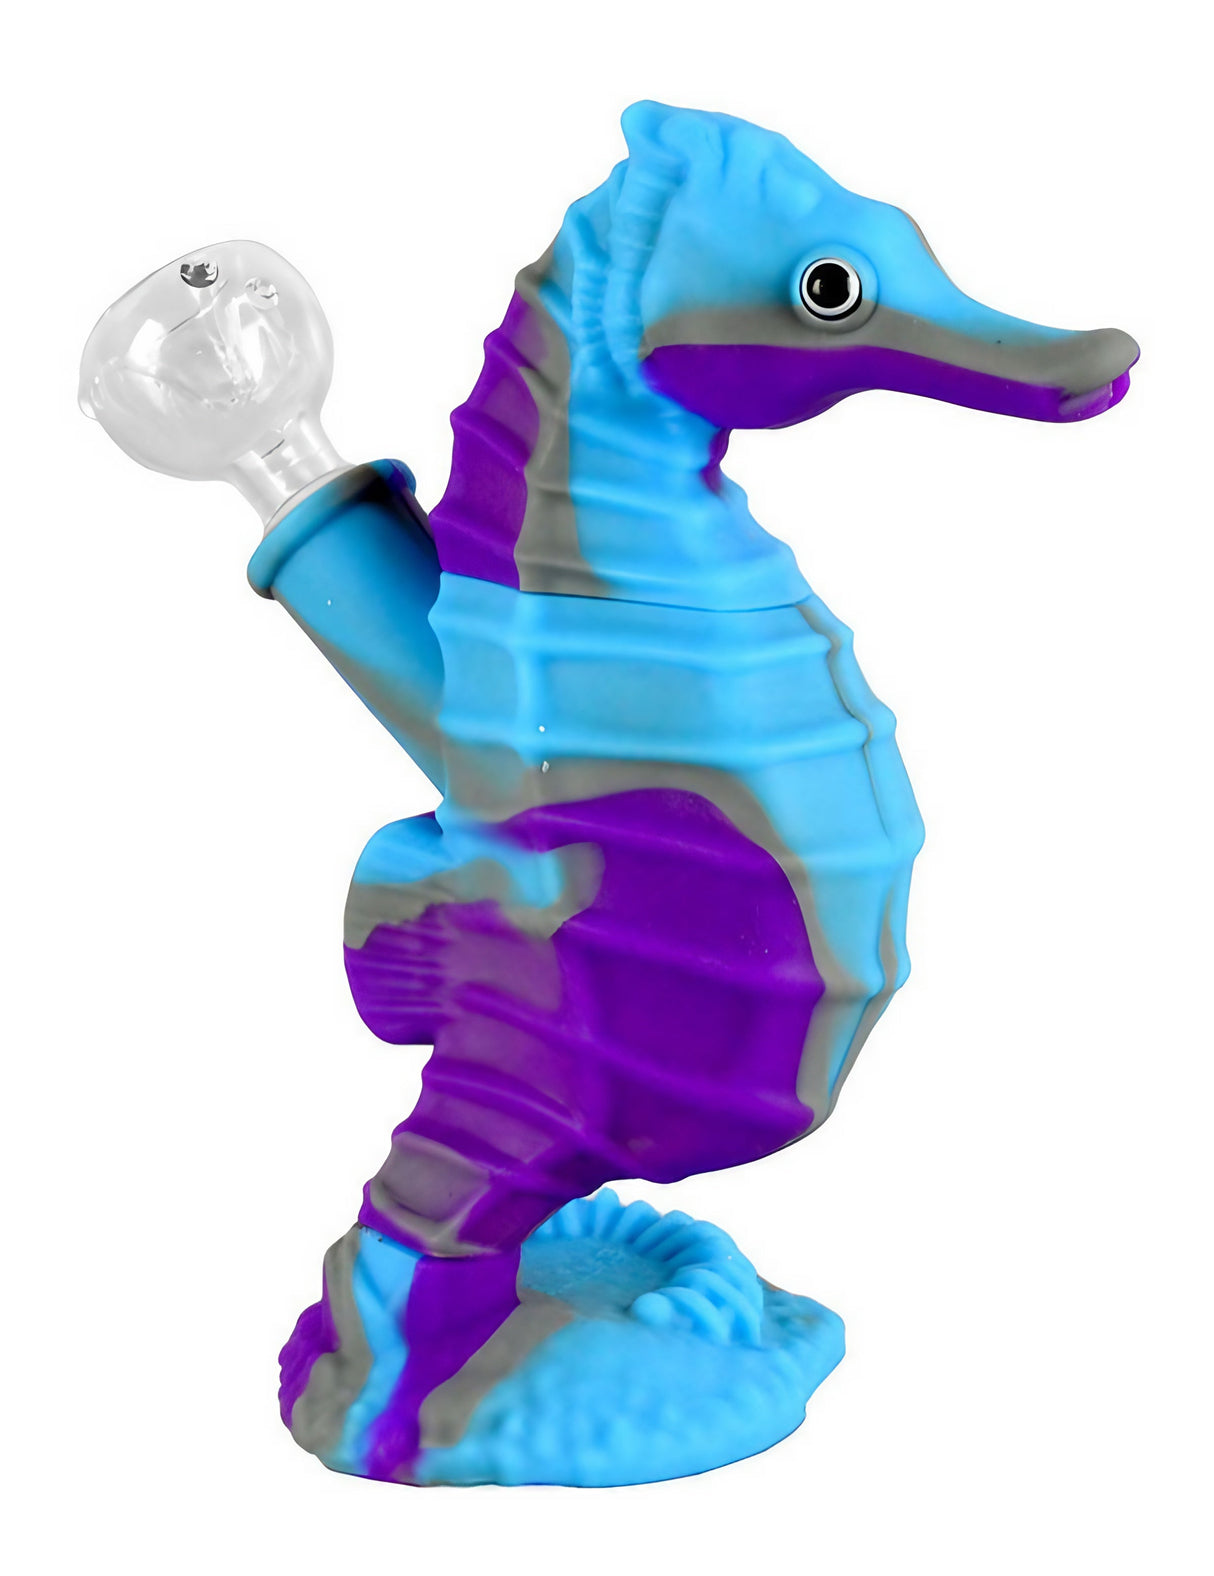 6" Silicone Sea Horse Waterpipe with Glass Slide in Blue and Purple